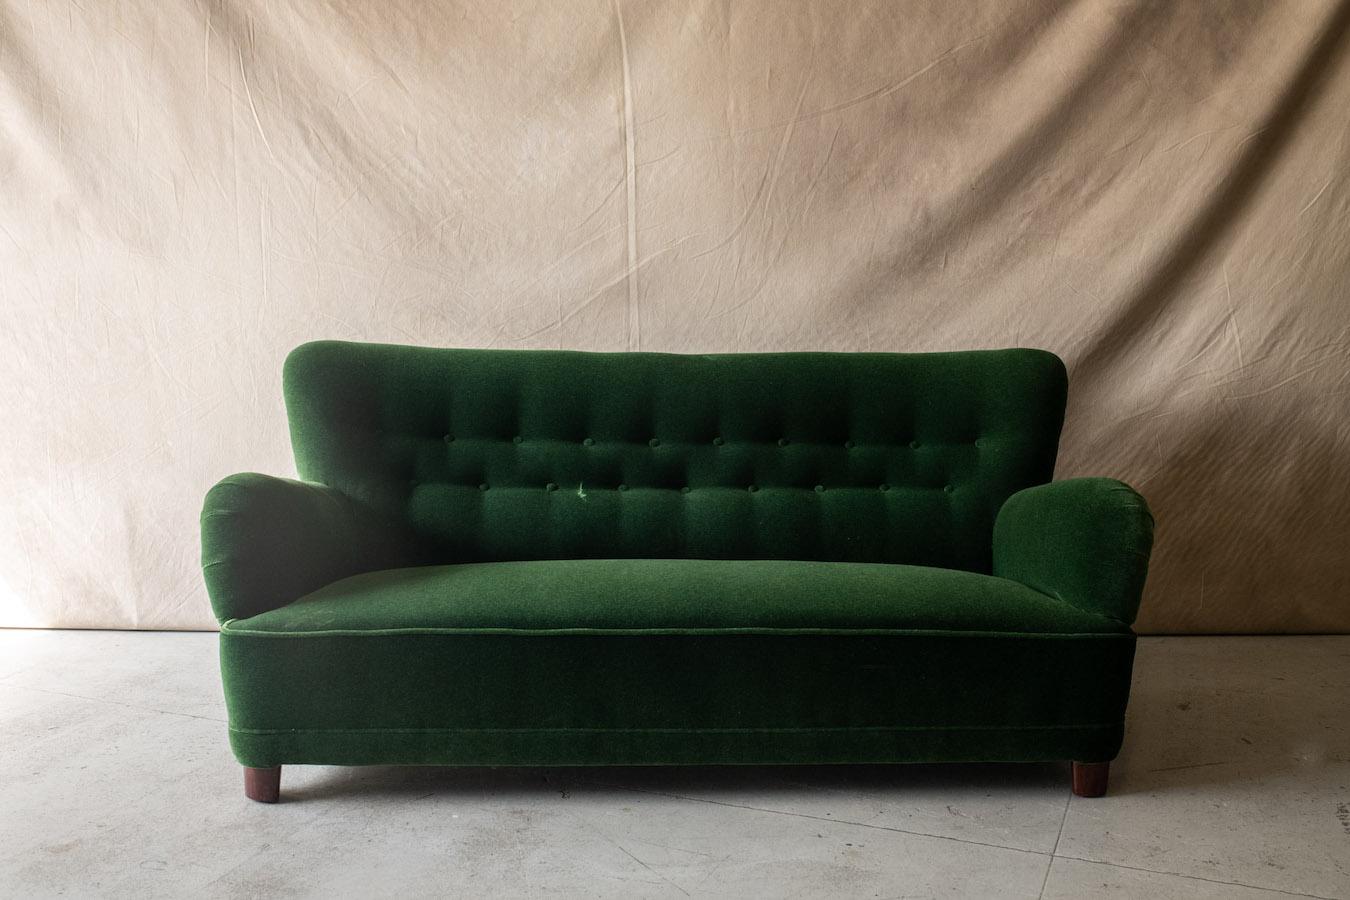 Vintage Danish Cabinetmaker Sofa In Mohair/Velour Fabric, Circa 1950.  Fantastic quality and design.  Upholstered a green mohair velvet fabric.  

We don't have the time to write an extensive description on each of our pieces. We prefer to speak